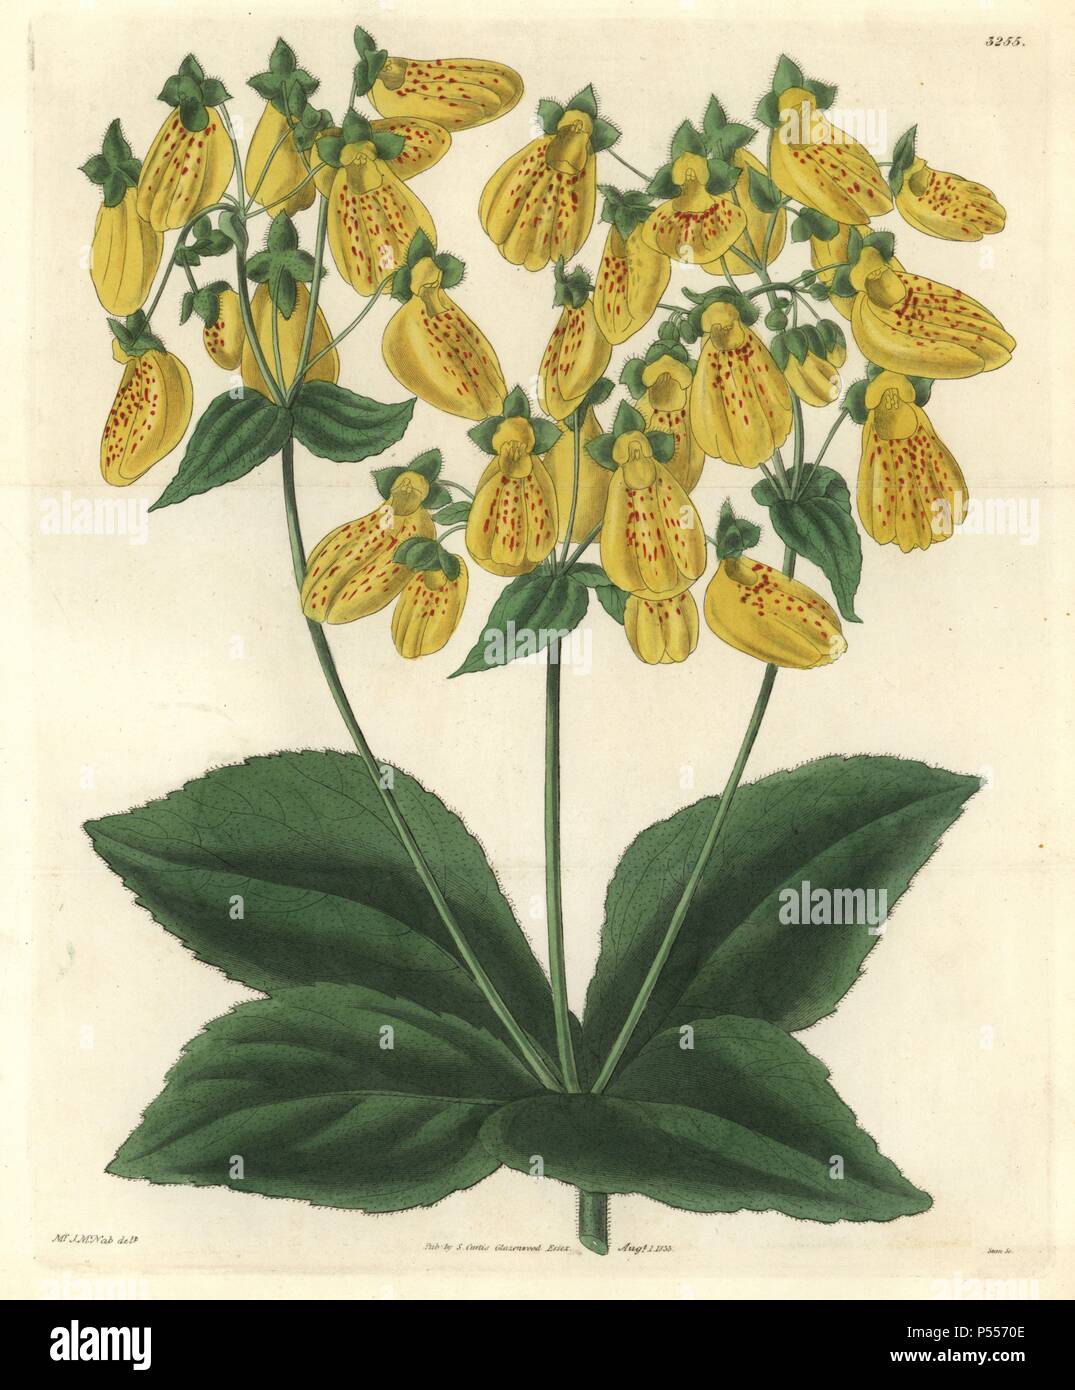 Crenate-flowered slipperwort, Calceolaria crenatifolia or Calceolaria tripartita. Illustration drawn by James McNab, engraved by Swan. Handcolored copperplate engraving from William Curtis's 'The Botanical Magazine,' Samuel Curtis, 1833. Hooker (1785-1865) was an English botanist, writer and artist. He was Regius Professor of Botany at Glasgow University, and editor of Curtis' 'Botanical Magazine' from 1827 to 1865. In 1841, he was appointed director of the Royal Botanic Gardens at Kew, and was succeeded by his son Joseph Dalton. Hooker documented the fern and orchid crazes that shook England  Stock Photo